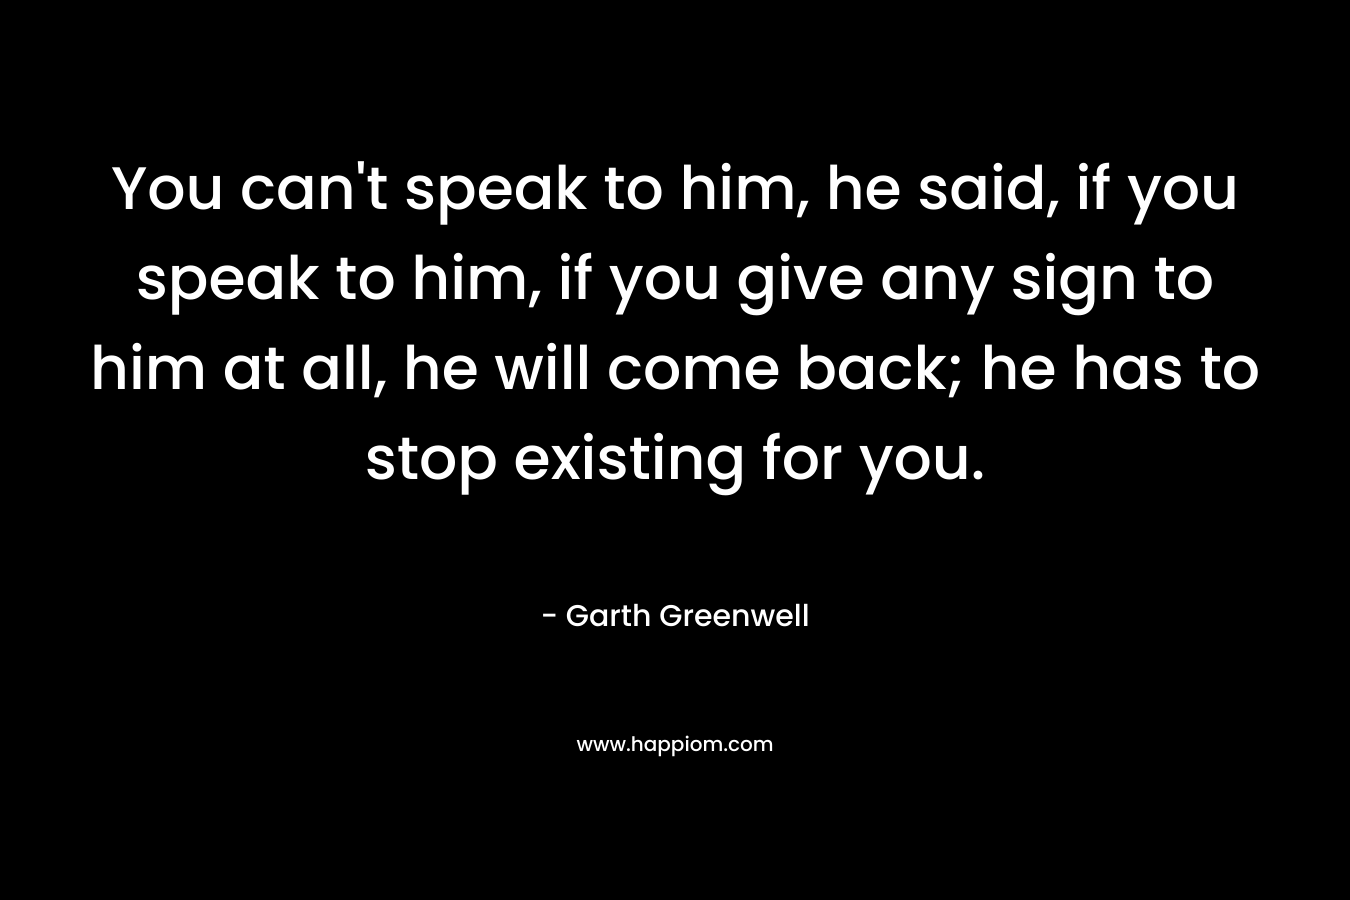 You can’t speak to him, he said, if you speak to him, if you give any sign to him at all, he will come back; he has to stop existing for you. – Garth Greenwell